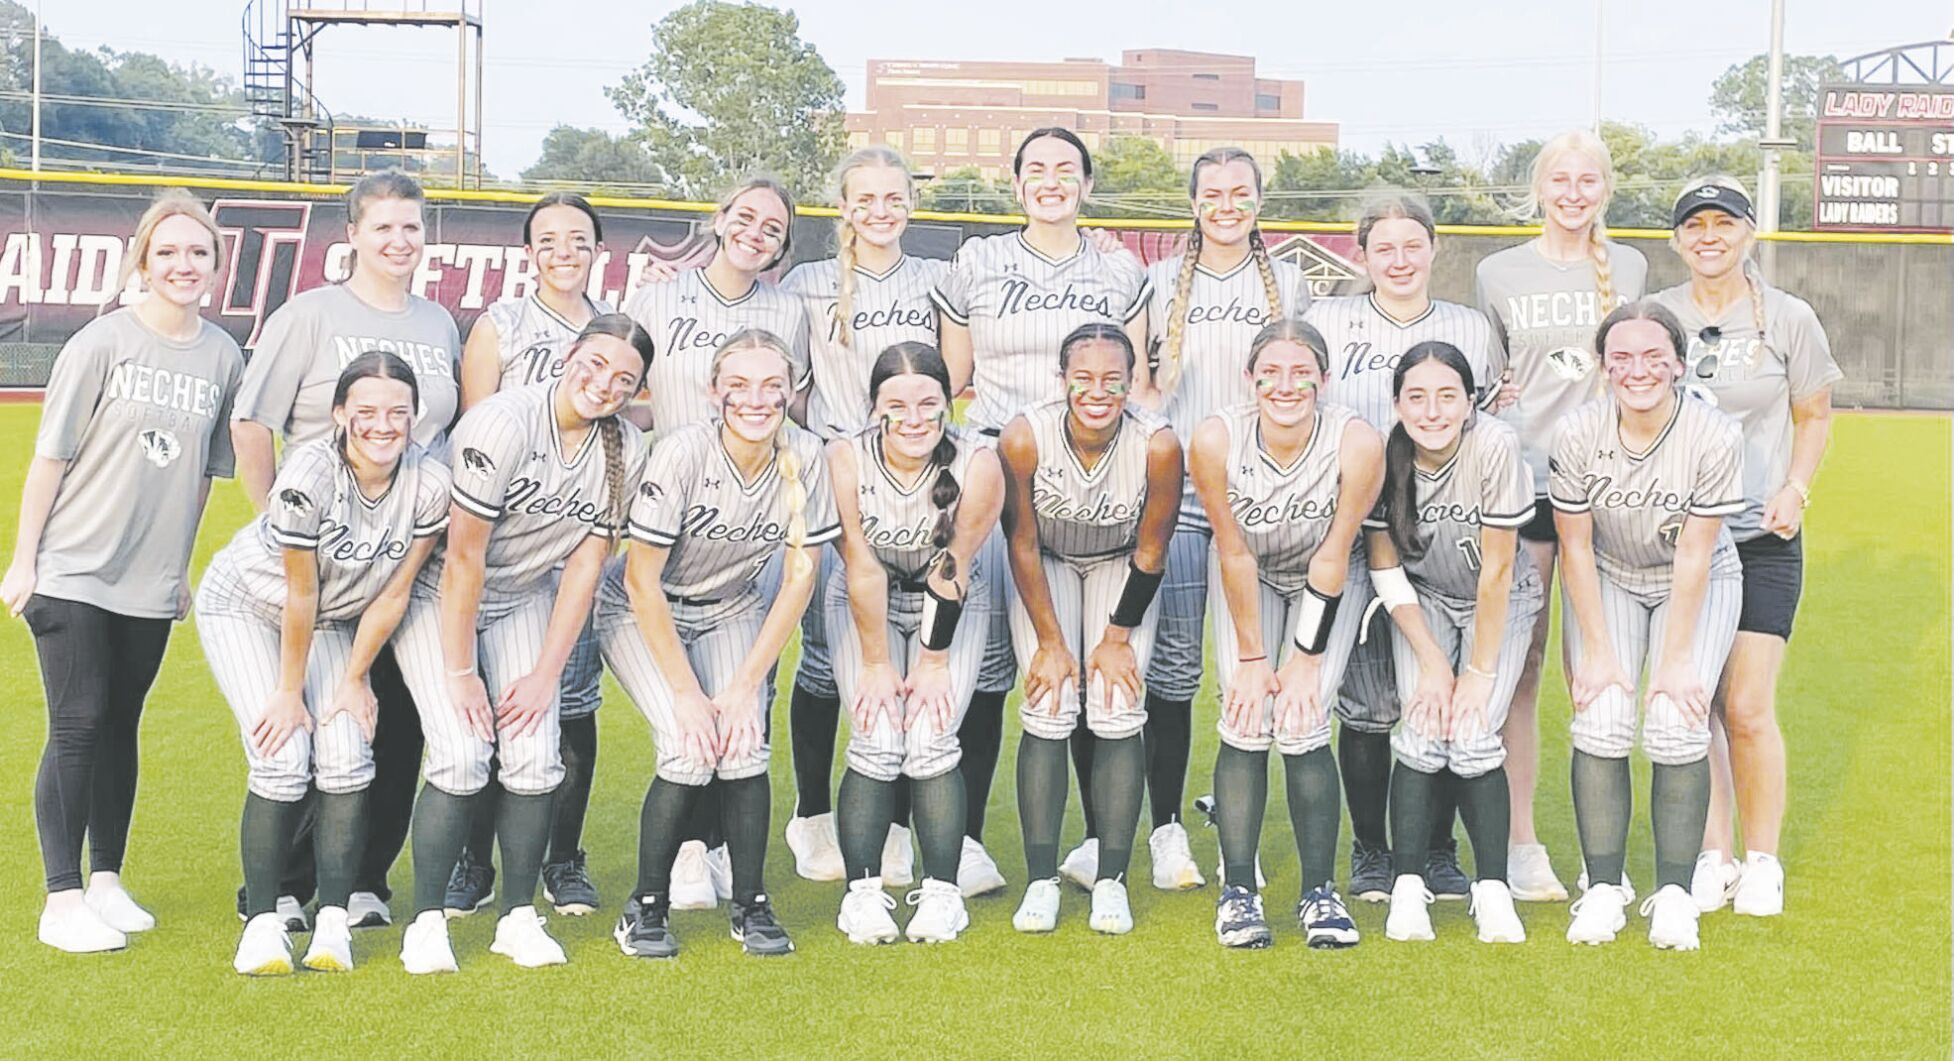 Neches and Slocum Head to Softball Regional Finals